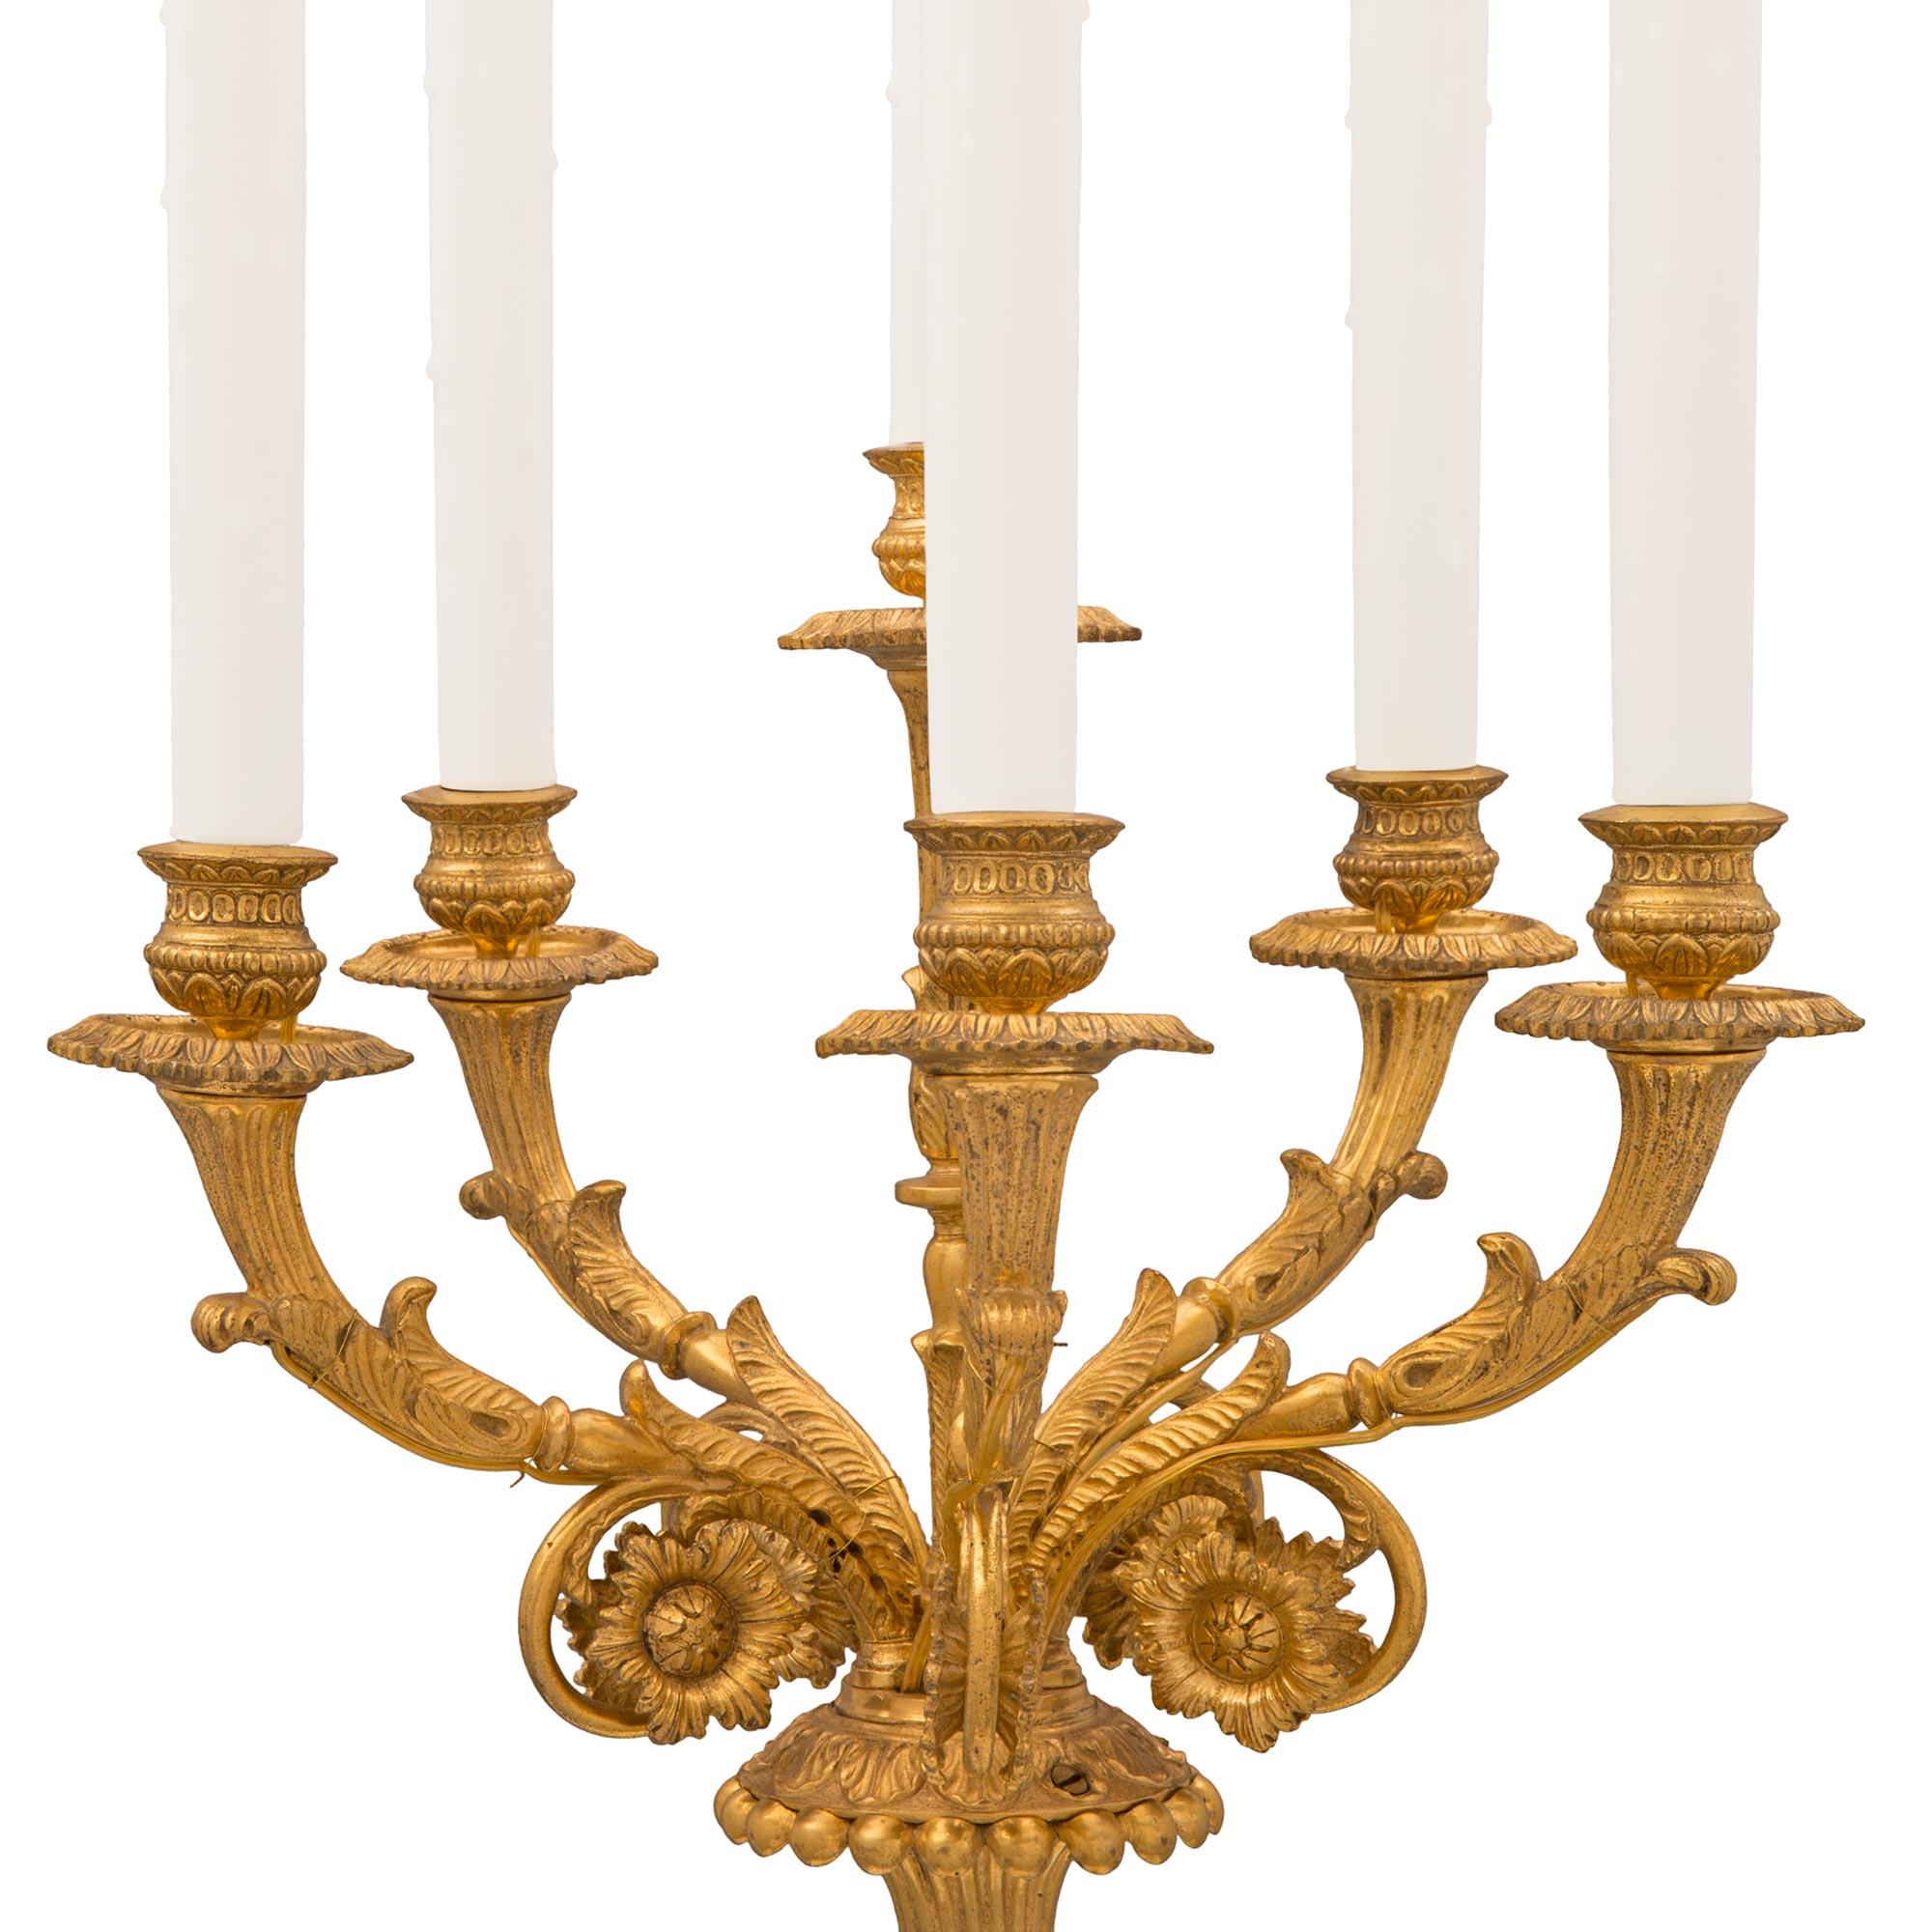 Pair of French Mid-19th Century Empire Style Ormolu Candelabras In Good Condition For Sale In West Palm Beach, FL